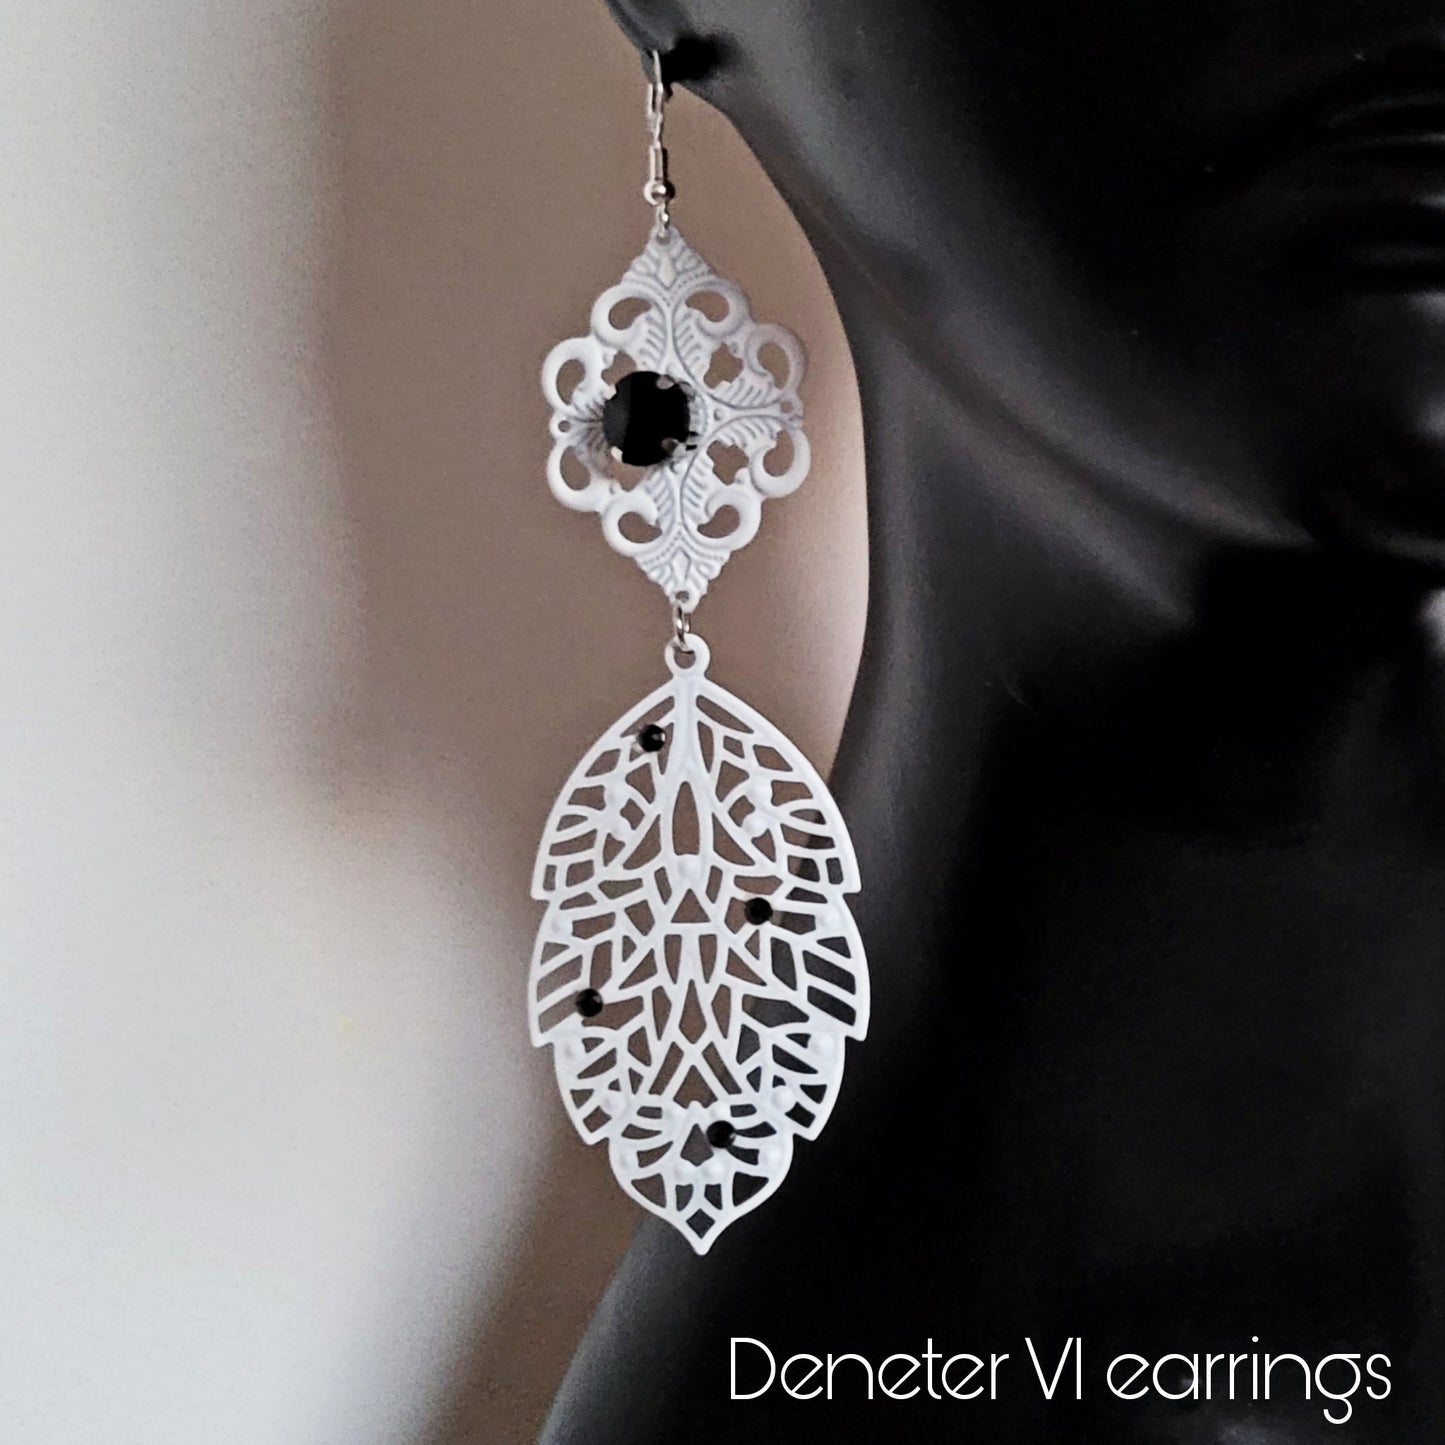 Deusa ex Machina collection: The Demeter earrings